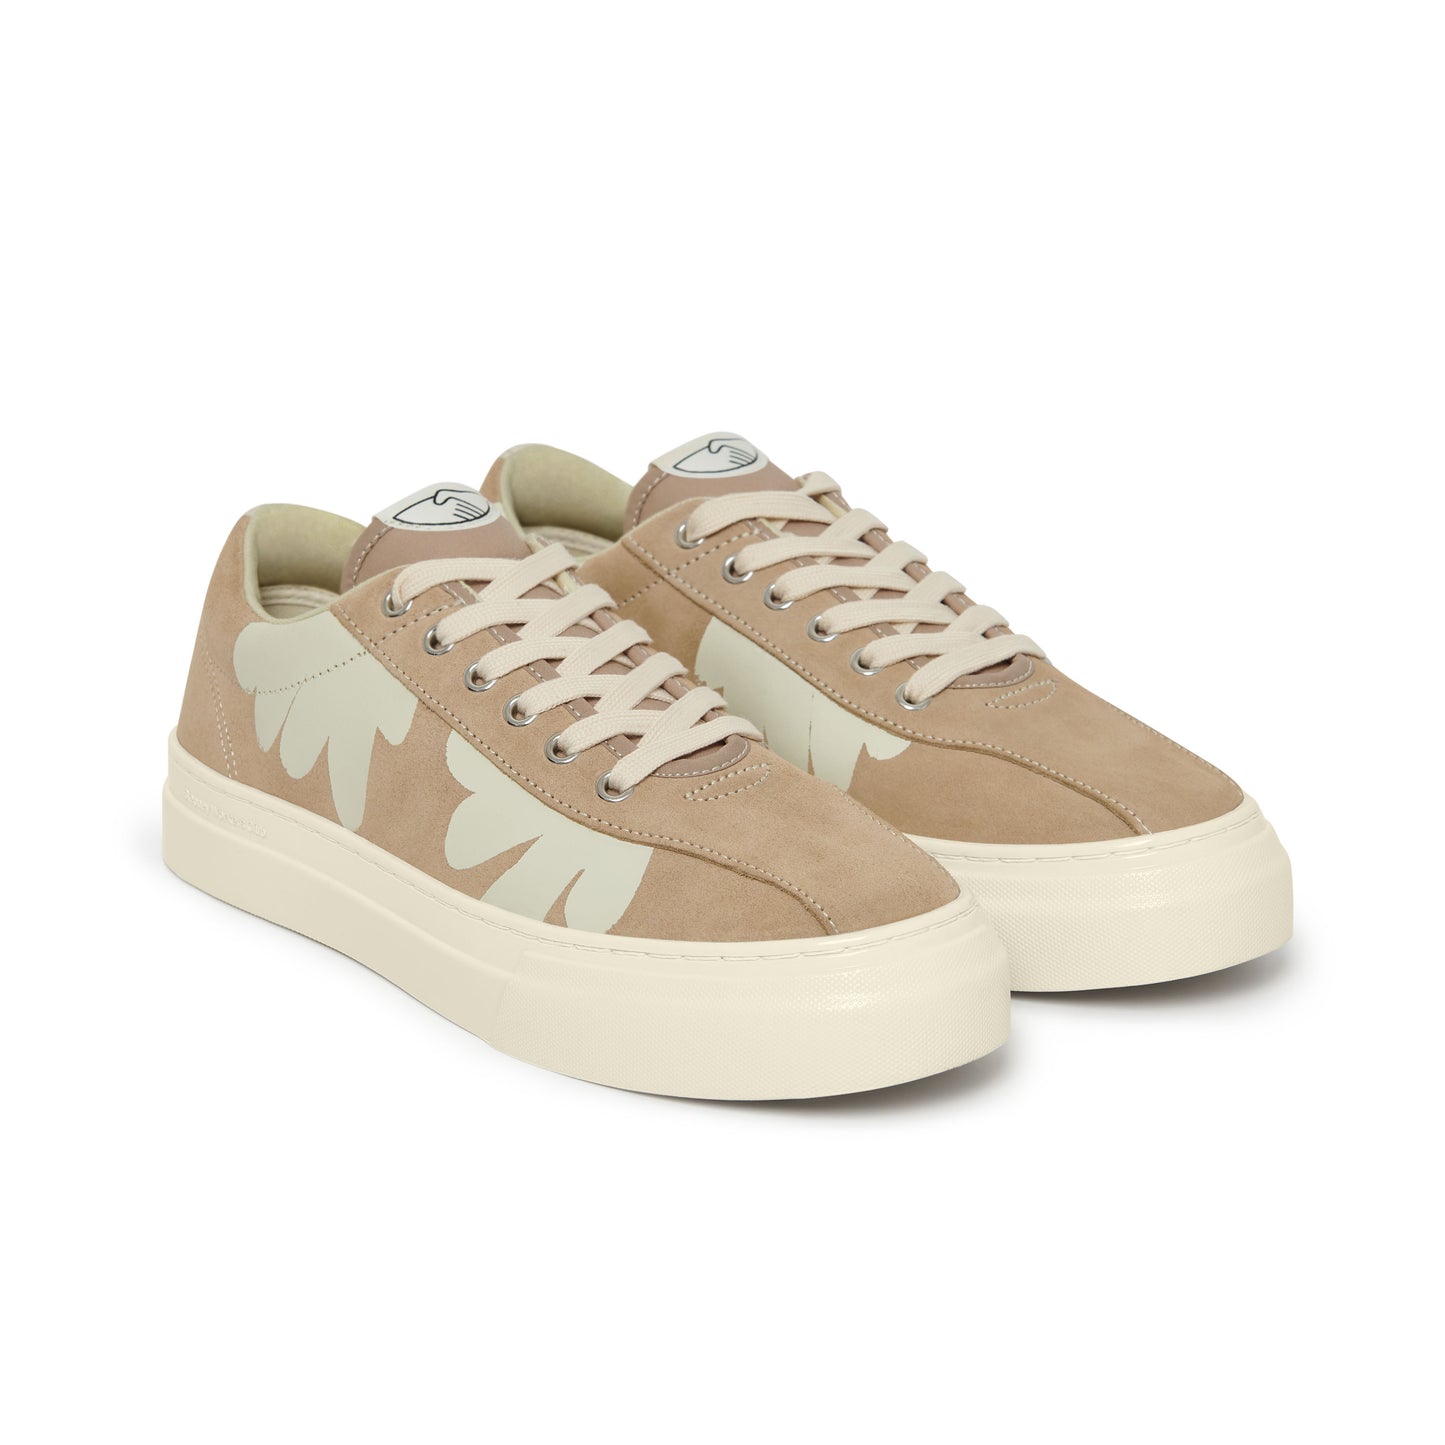 DELLOW CUP SHROOM HANDS SUEDE EARTH-WHITE